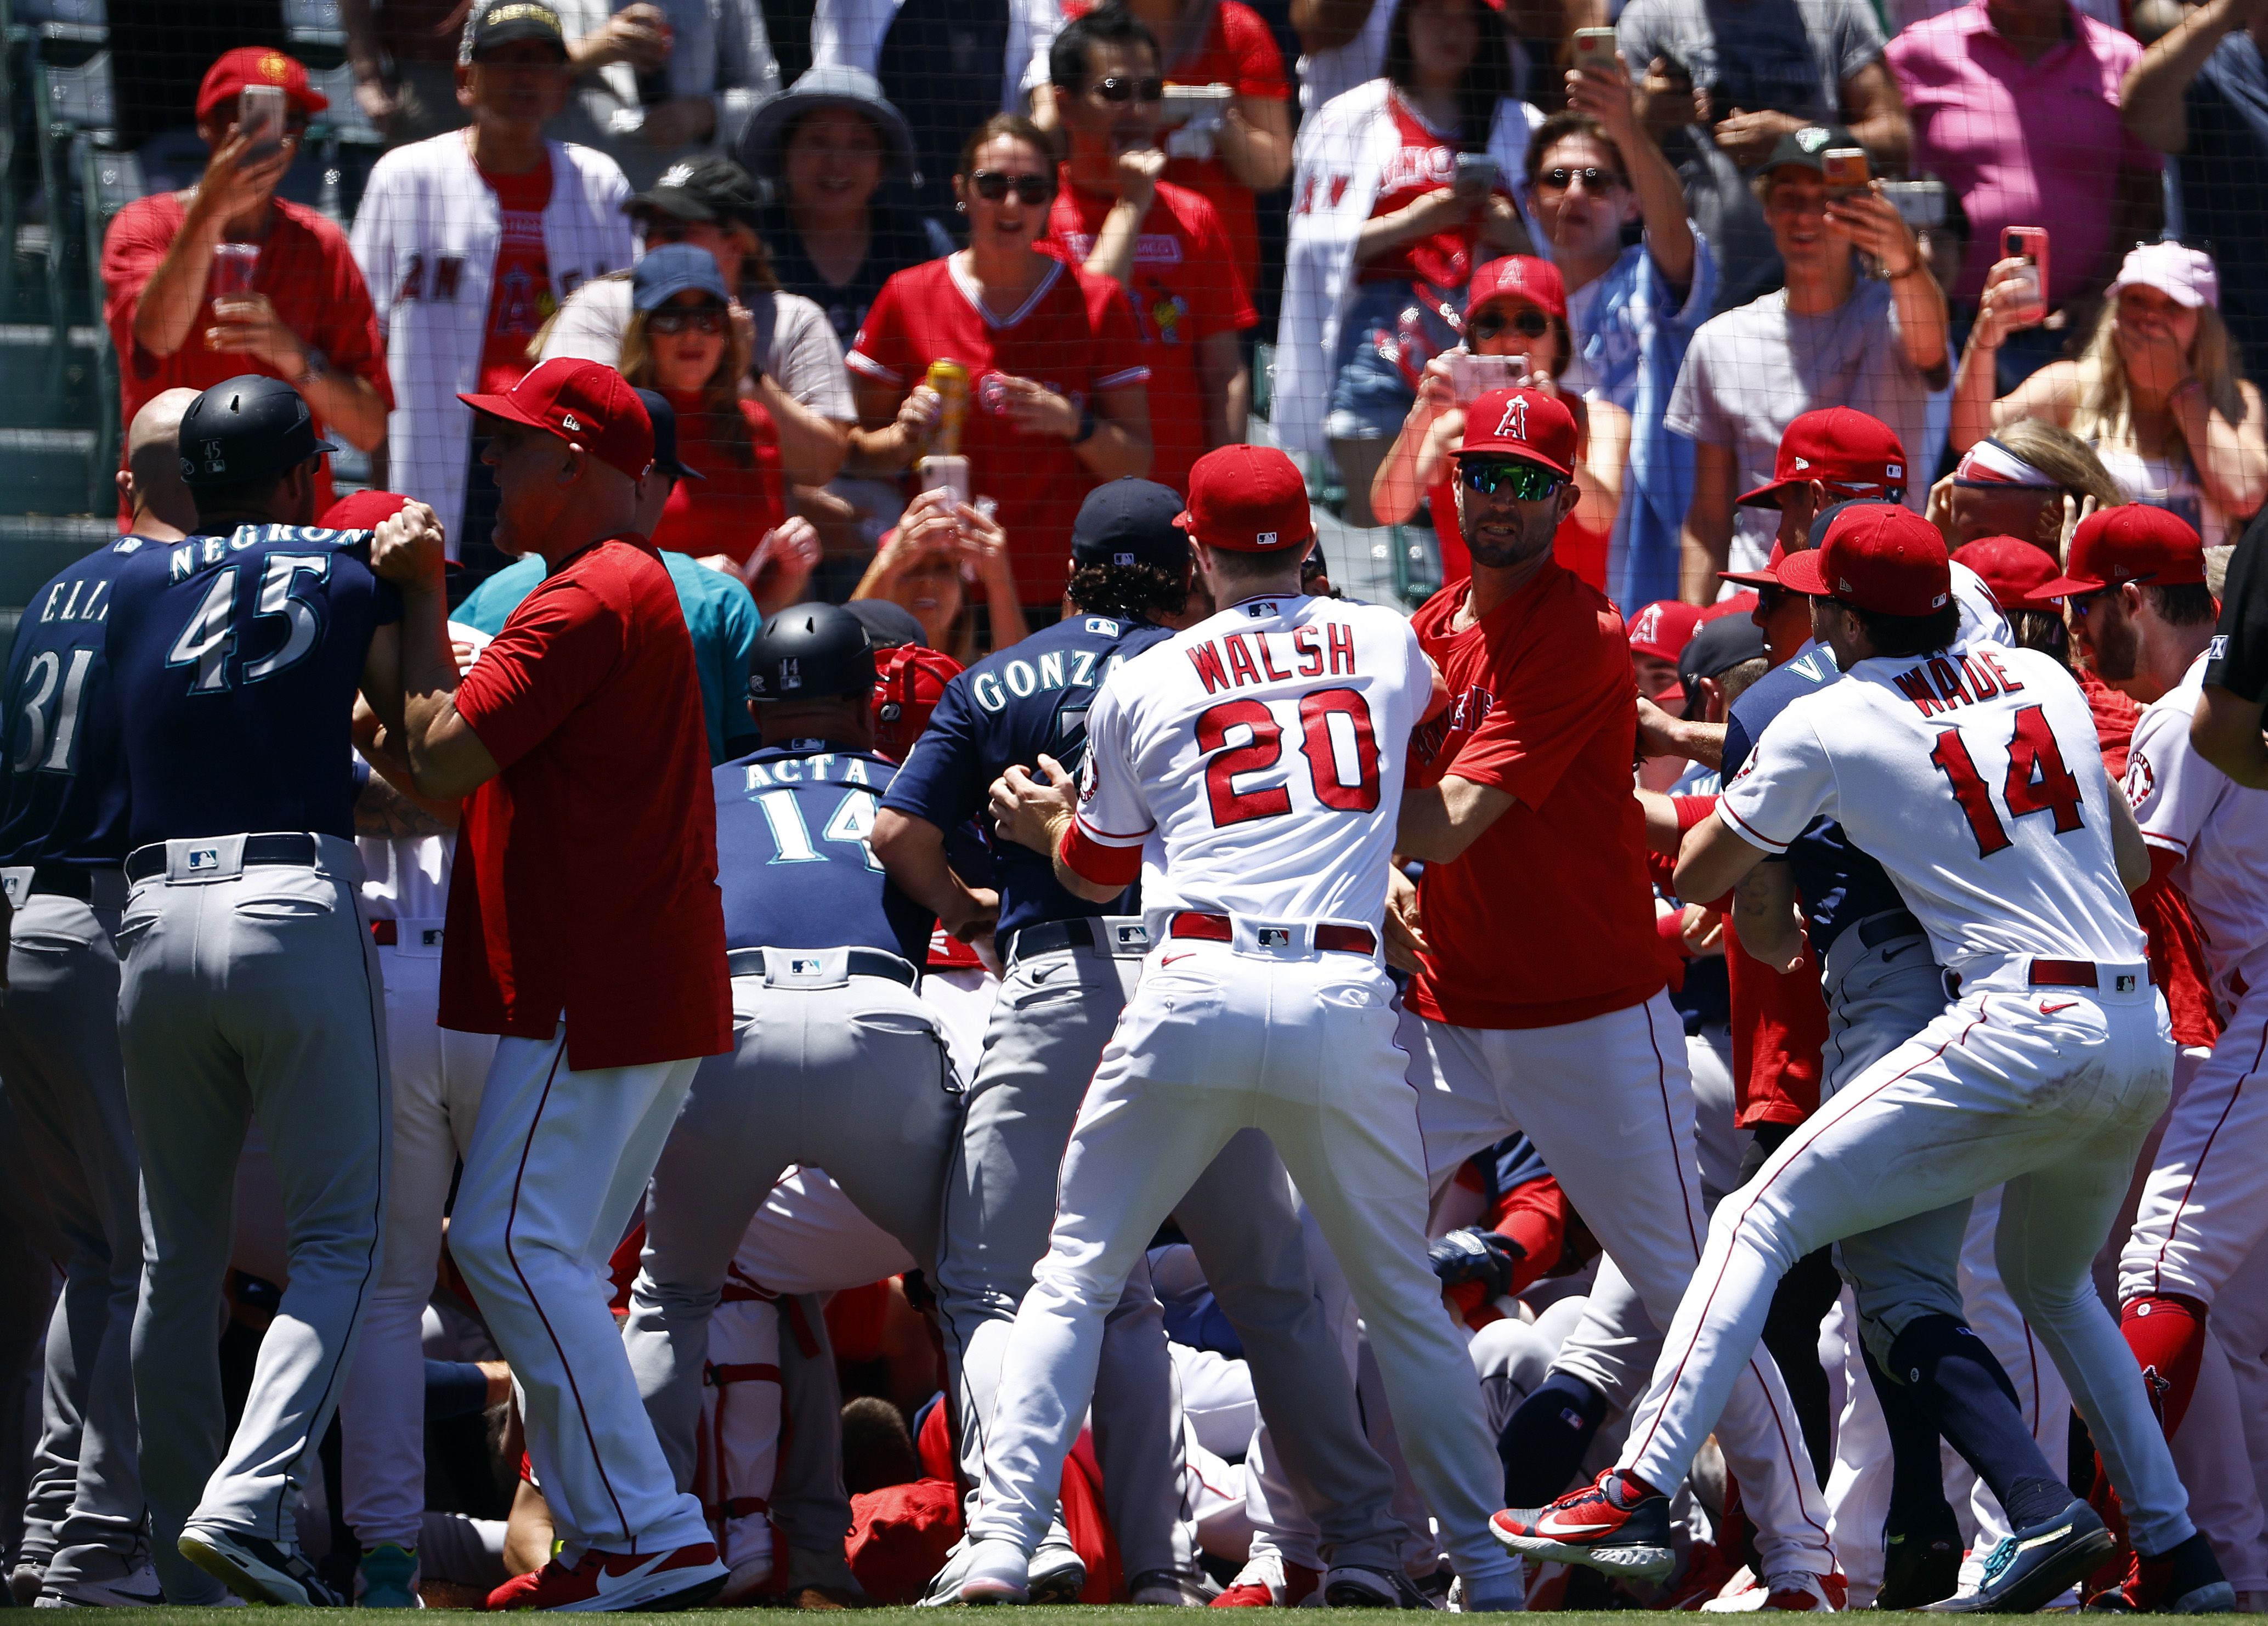 Angels vs Mariners: Mass brawl and eight ejections overshadow Los Angeles'  win over Seattle